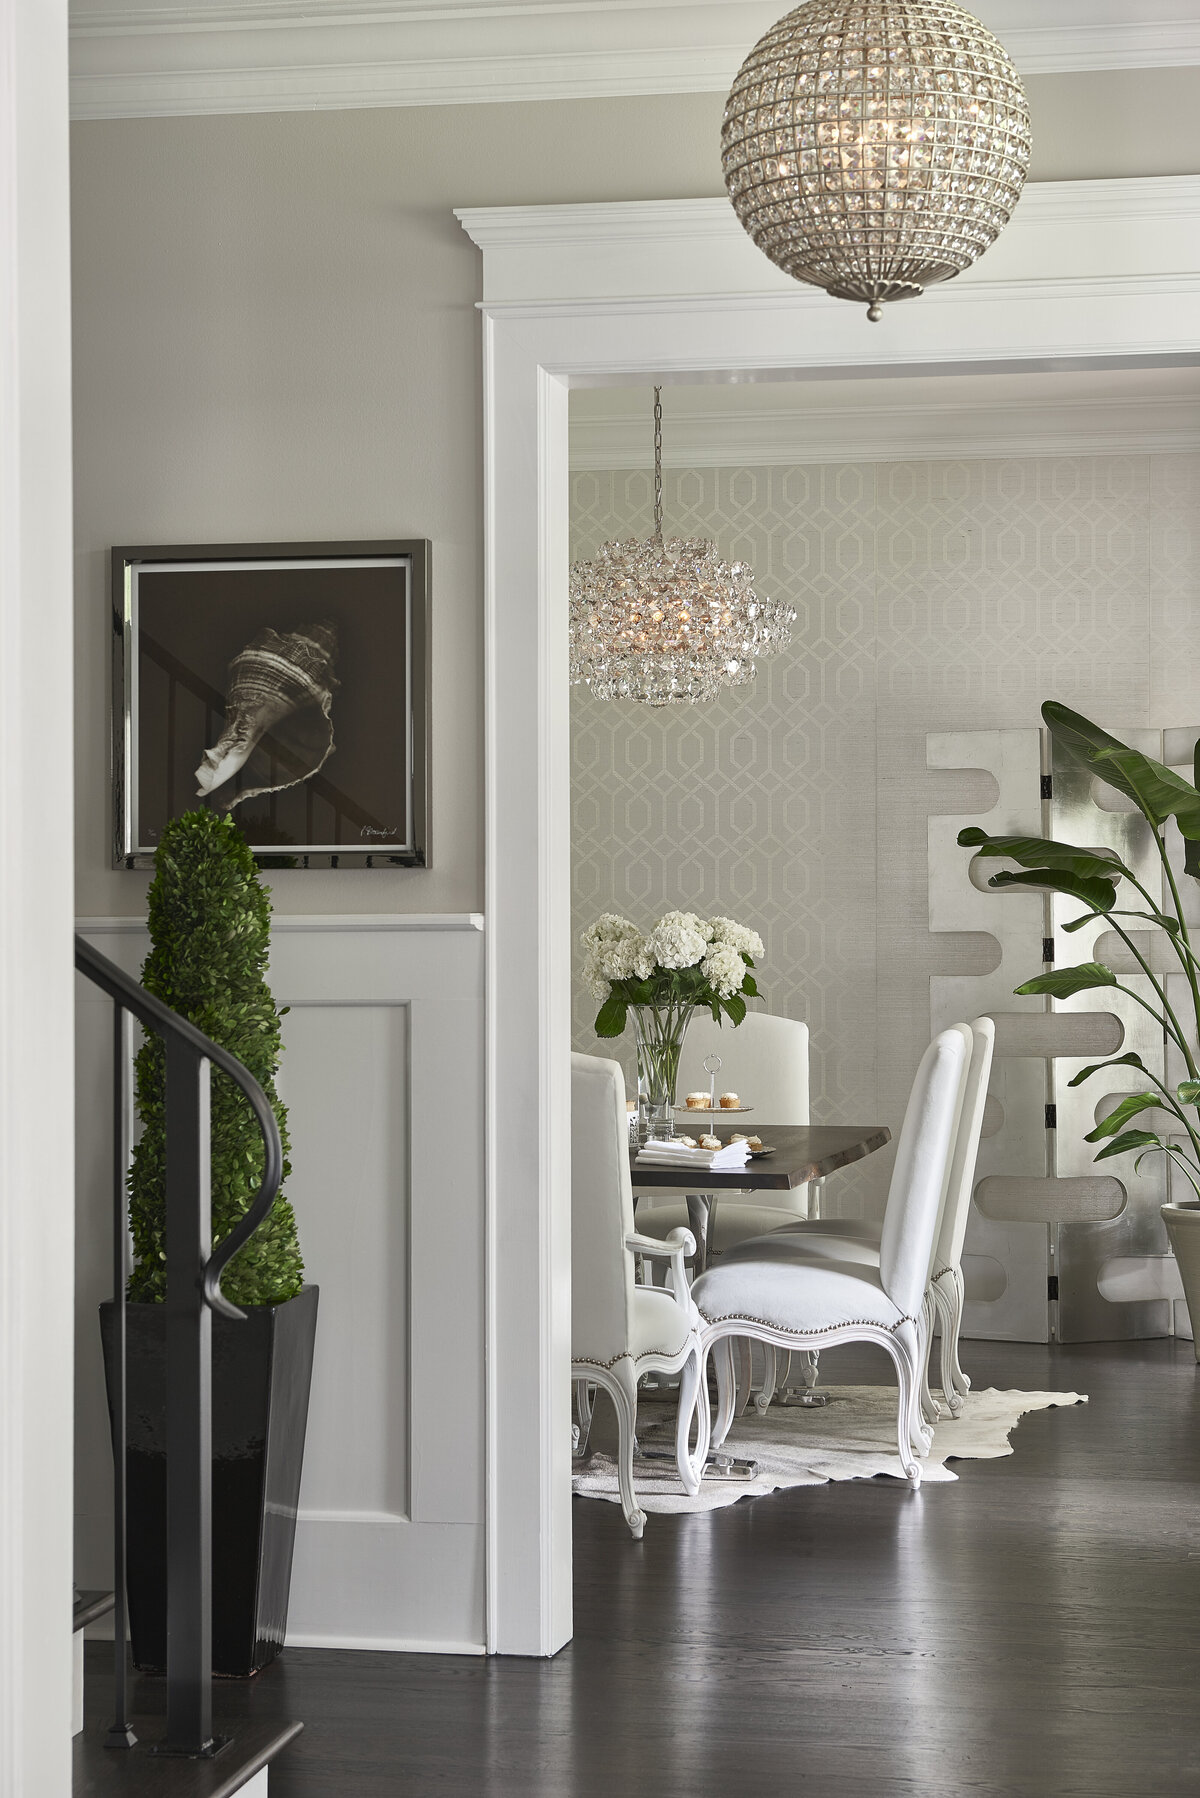 White Comfy dining Chairs with Drop Chandelier